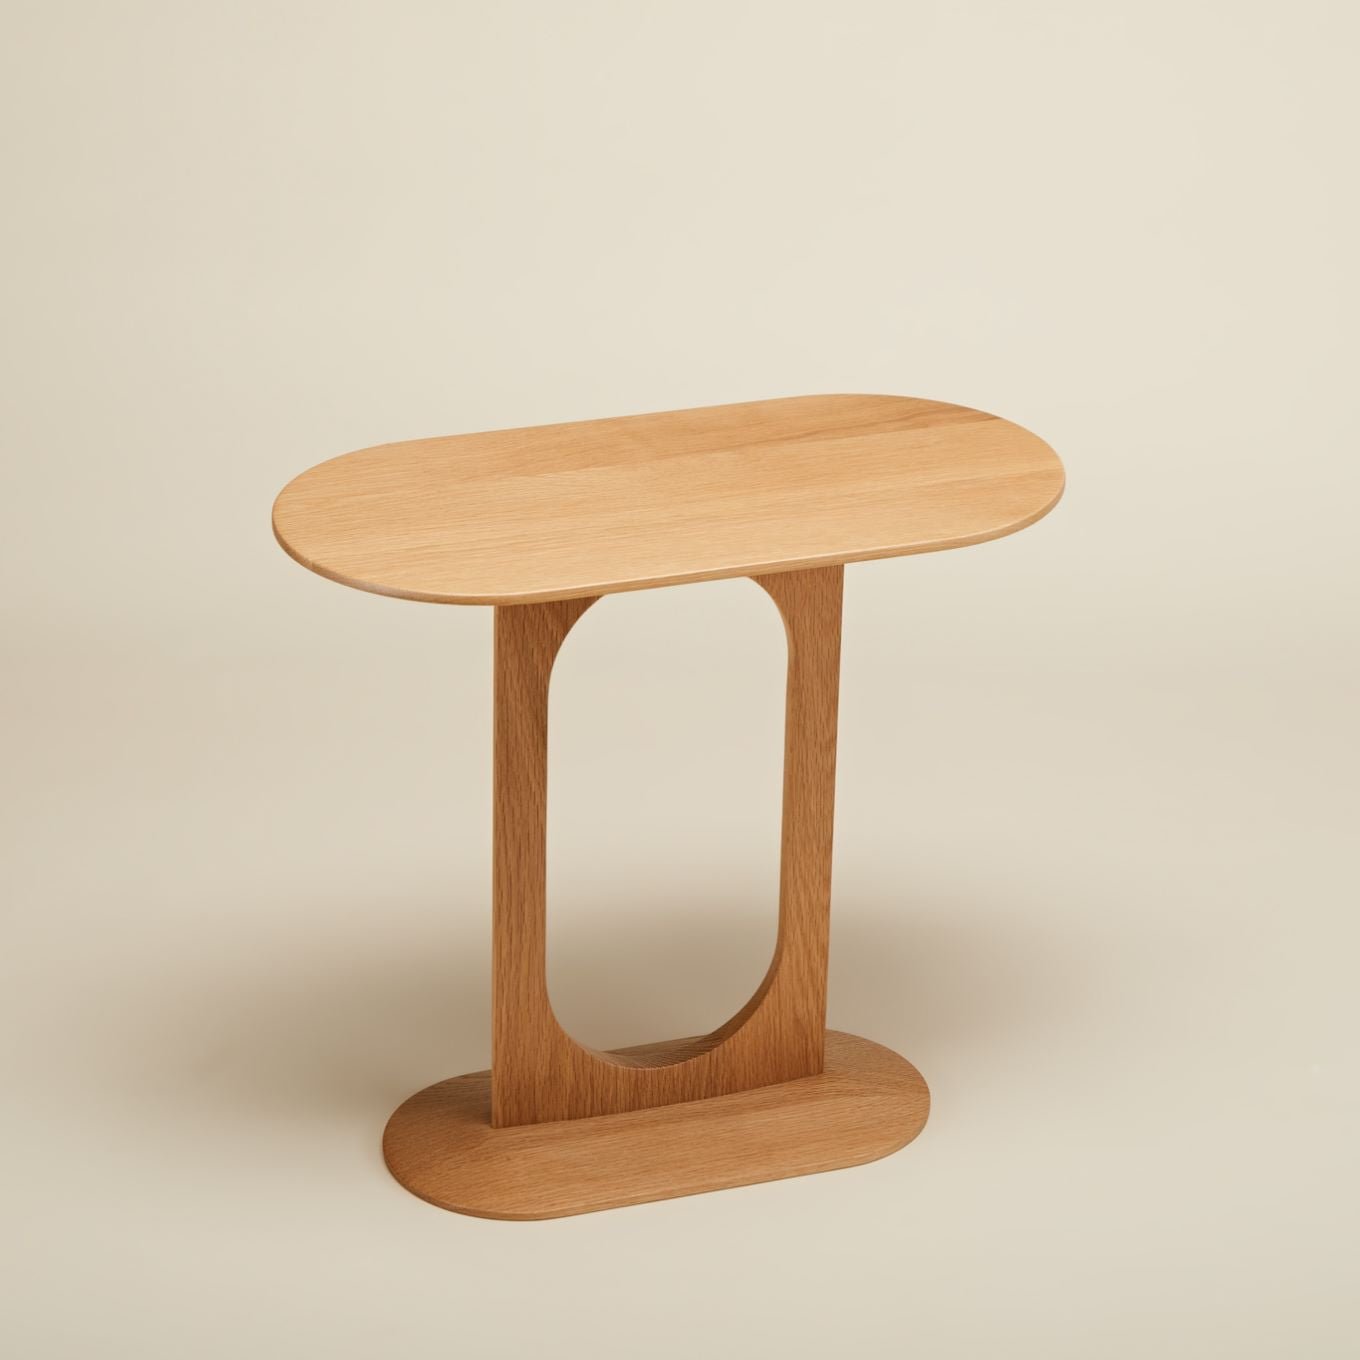 Ethos side table by E9 Design in solid american white oak timber